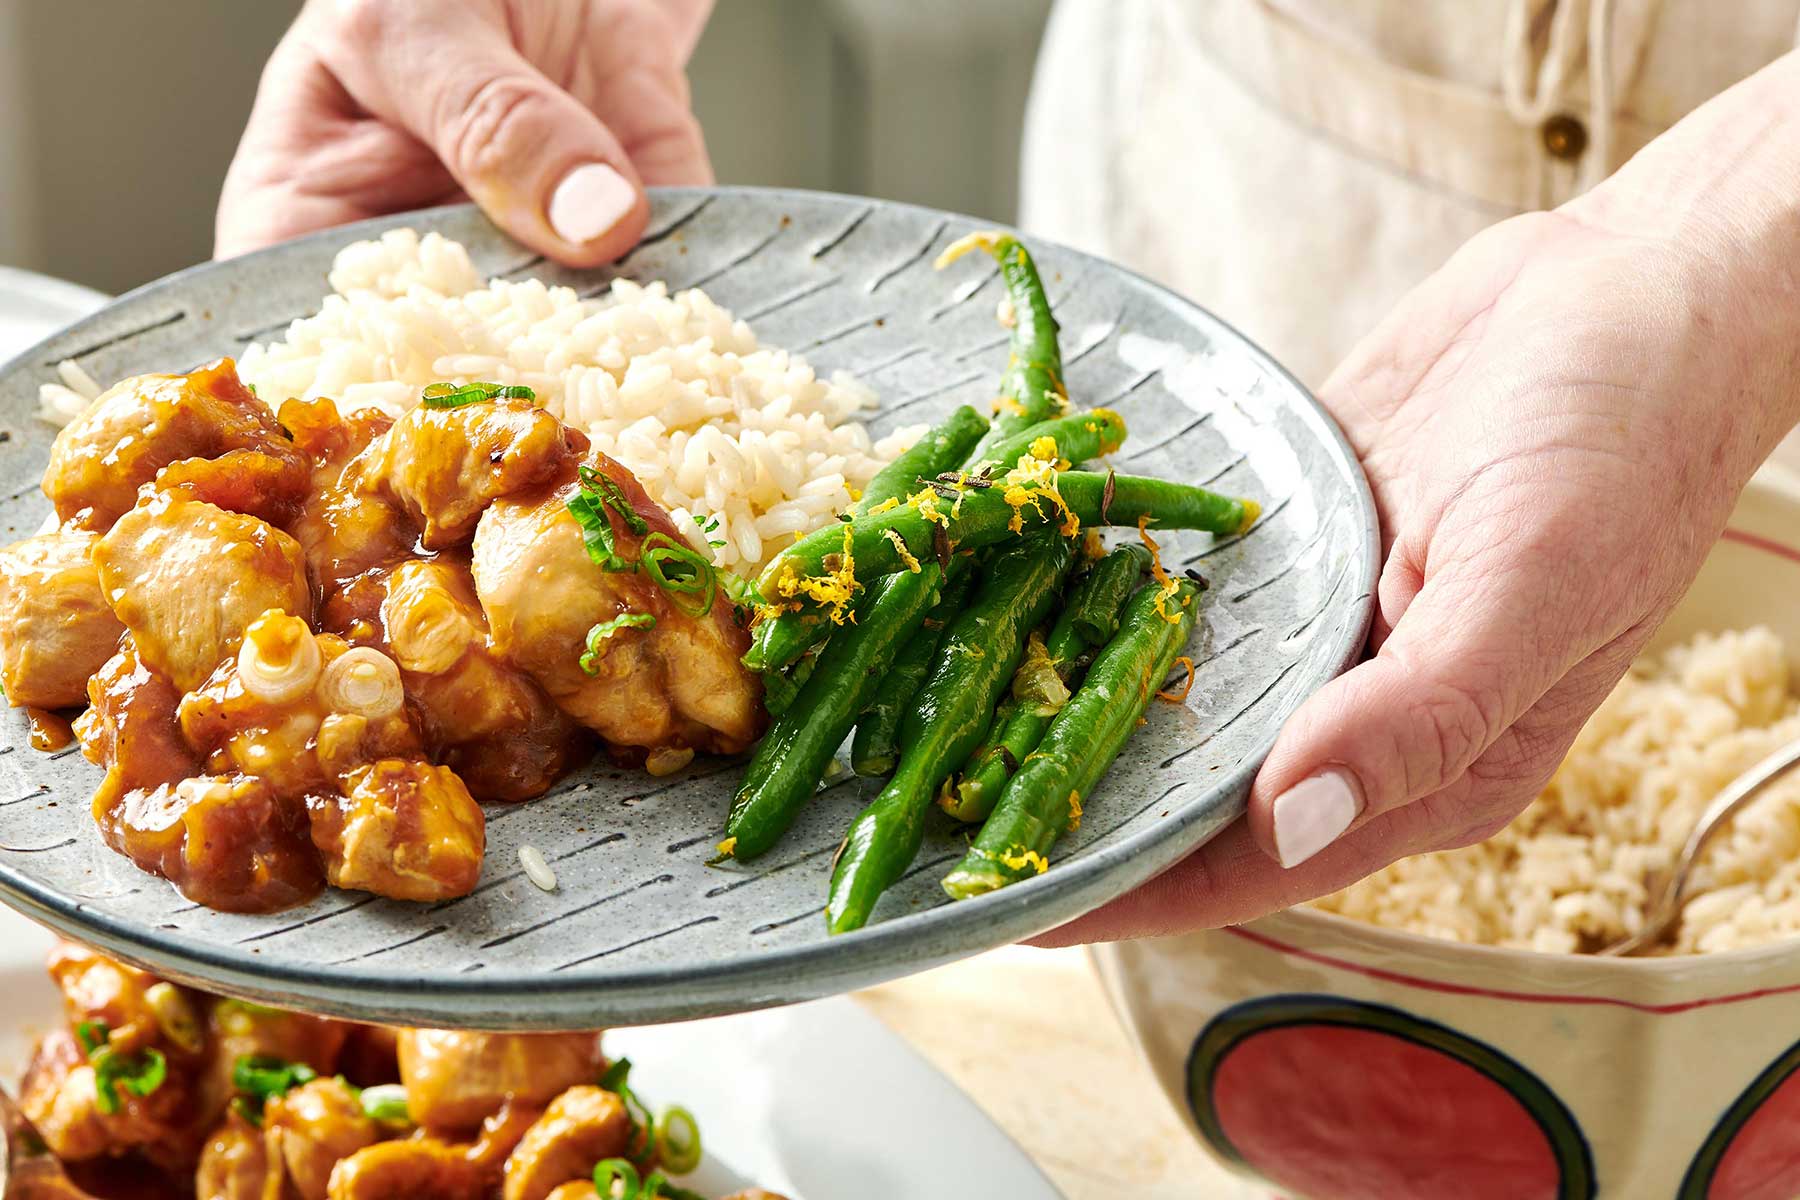 Green Beans with Gremolata on a plate with orange chicken.